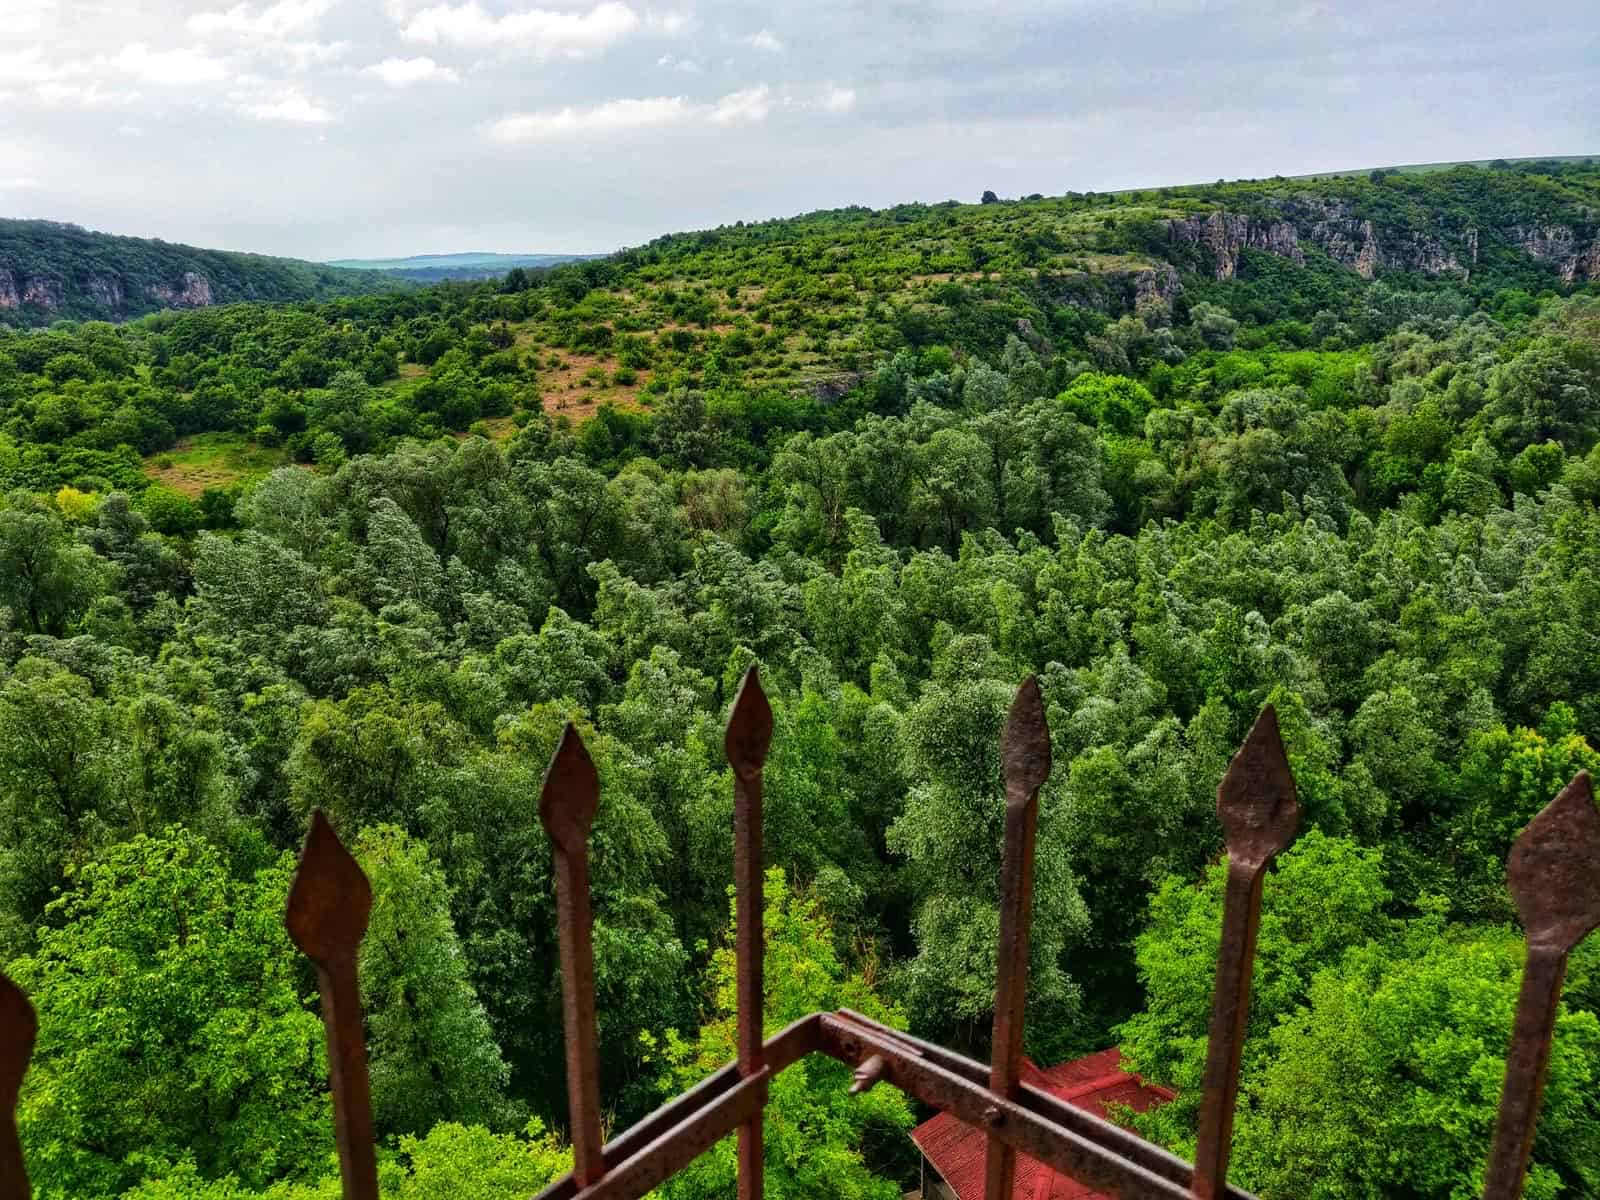 The view from on high within Ivanovo monastery